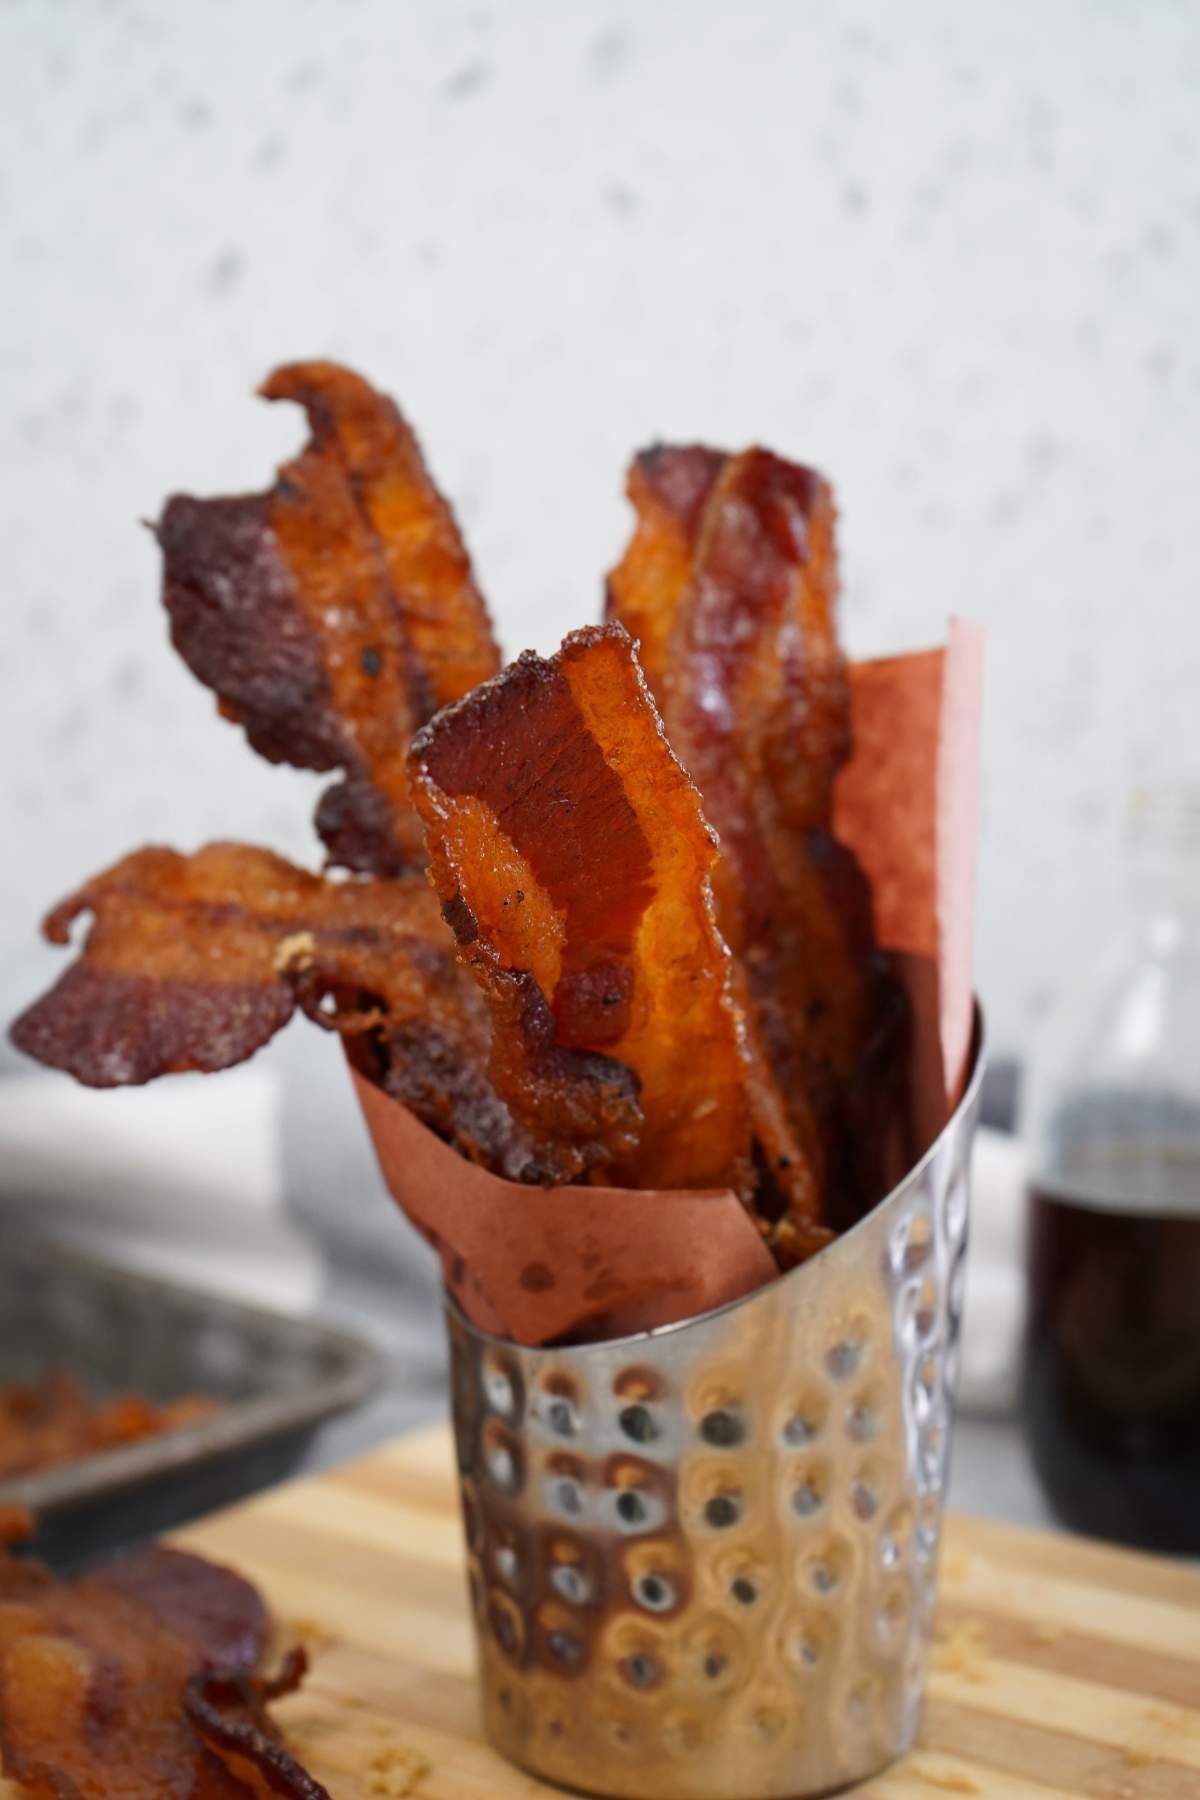 Candied bacon slices in holder.